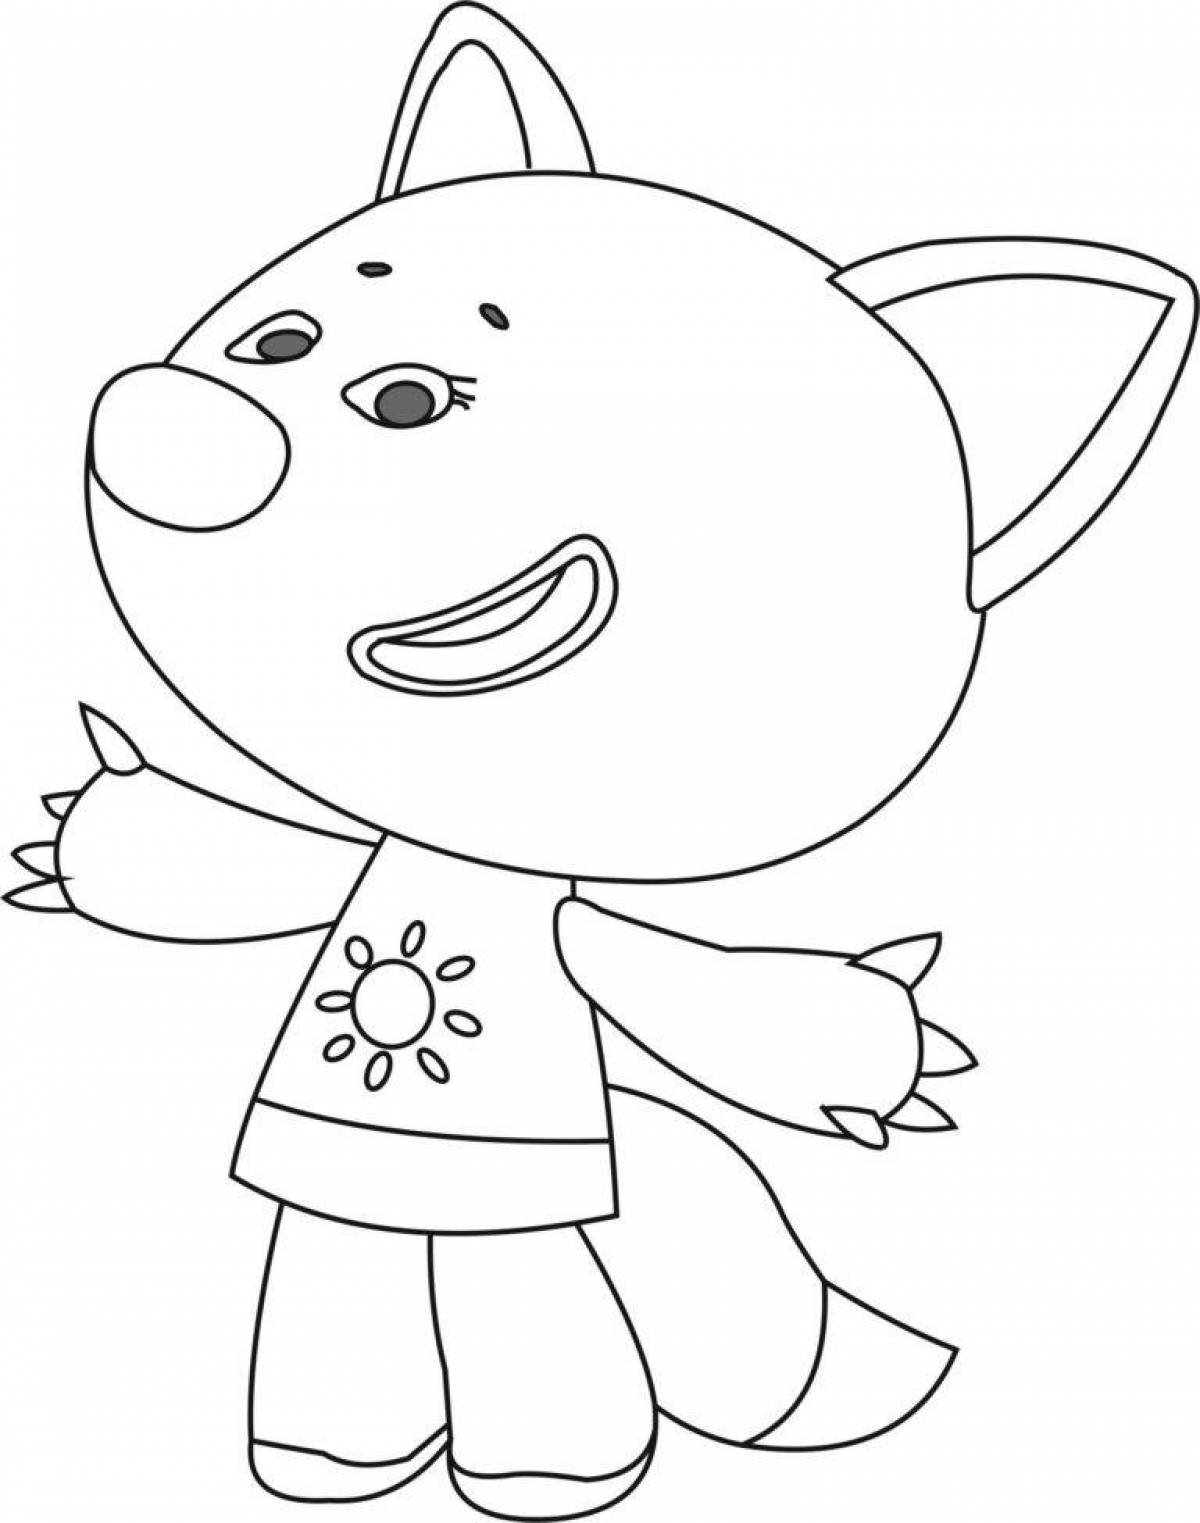 Majestic bear coloring pages